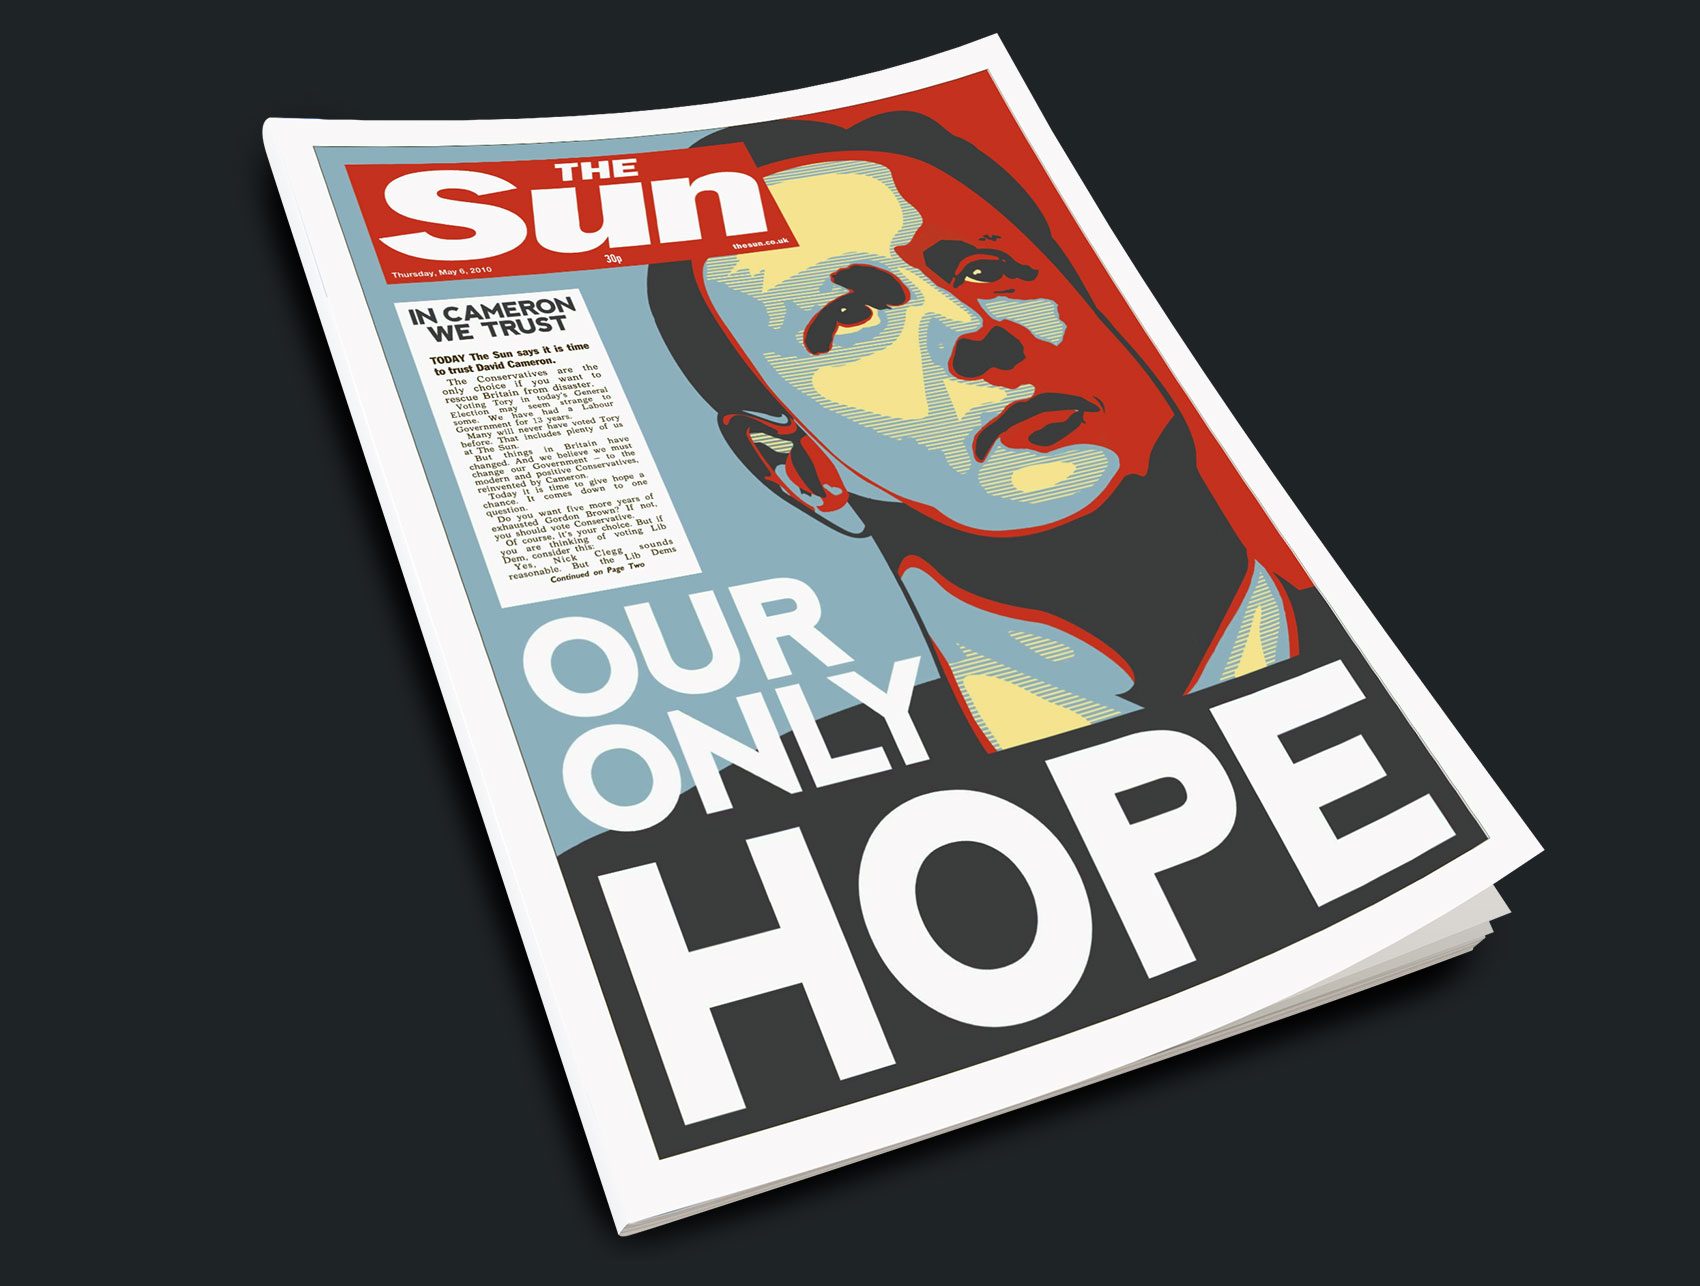 The Sun Front Page, David Cameron: Our Only Hope. In Cameron we trust